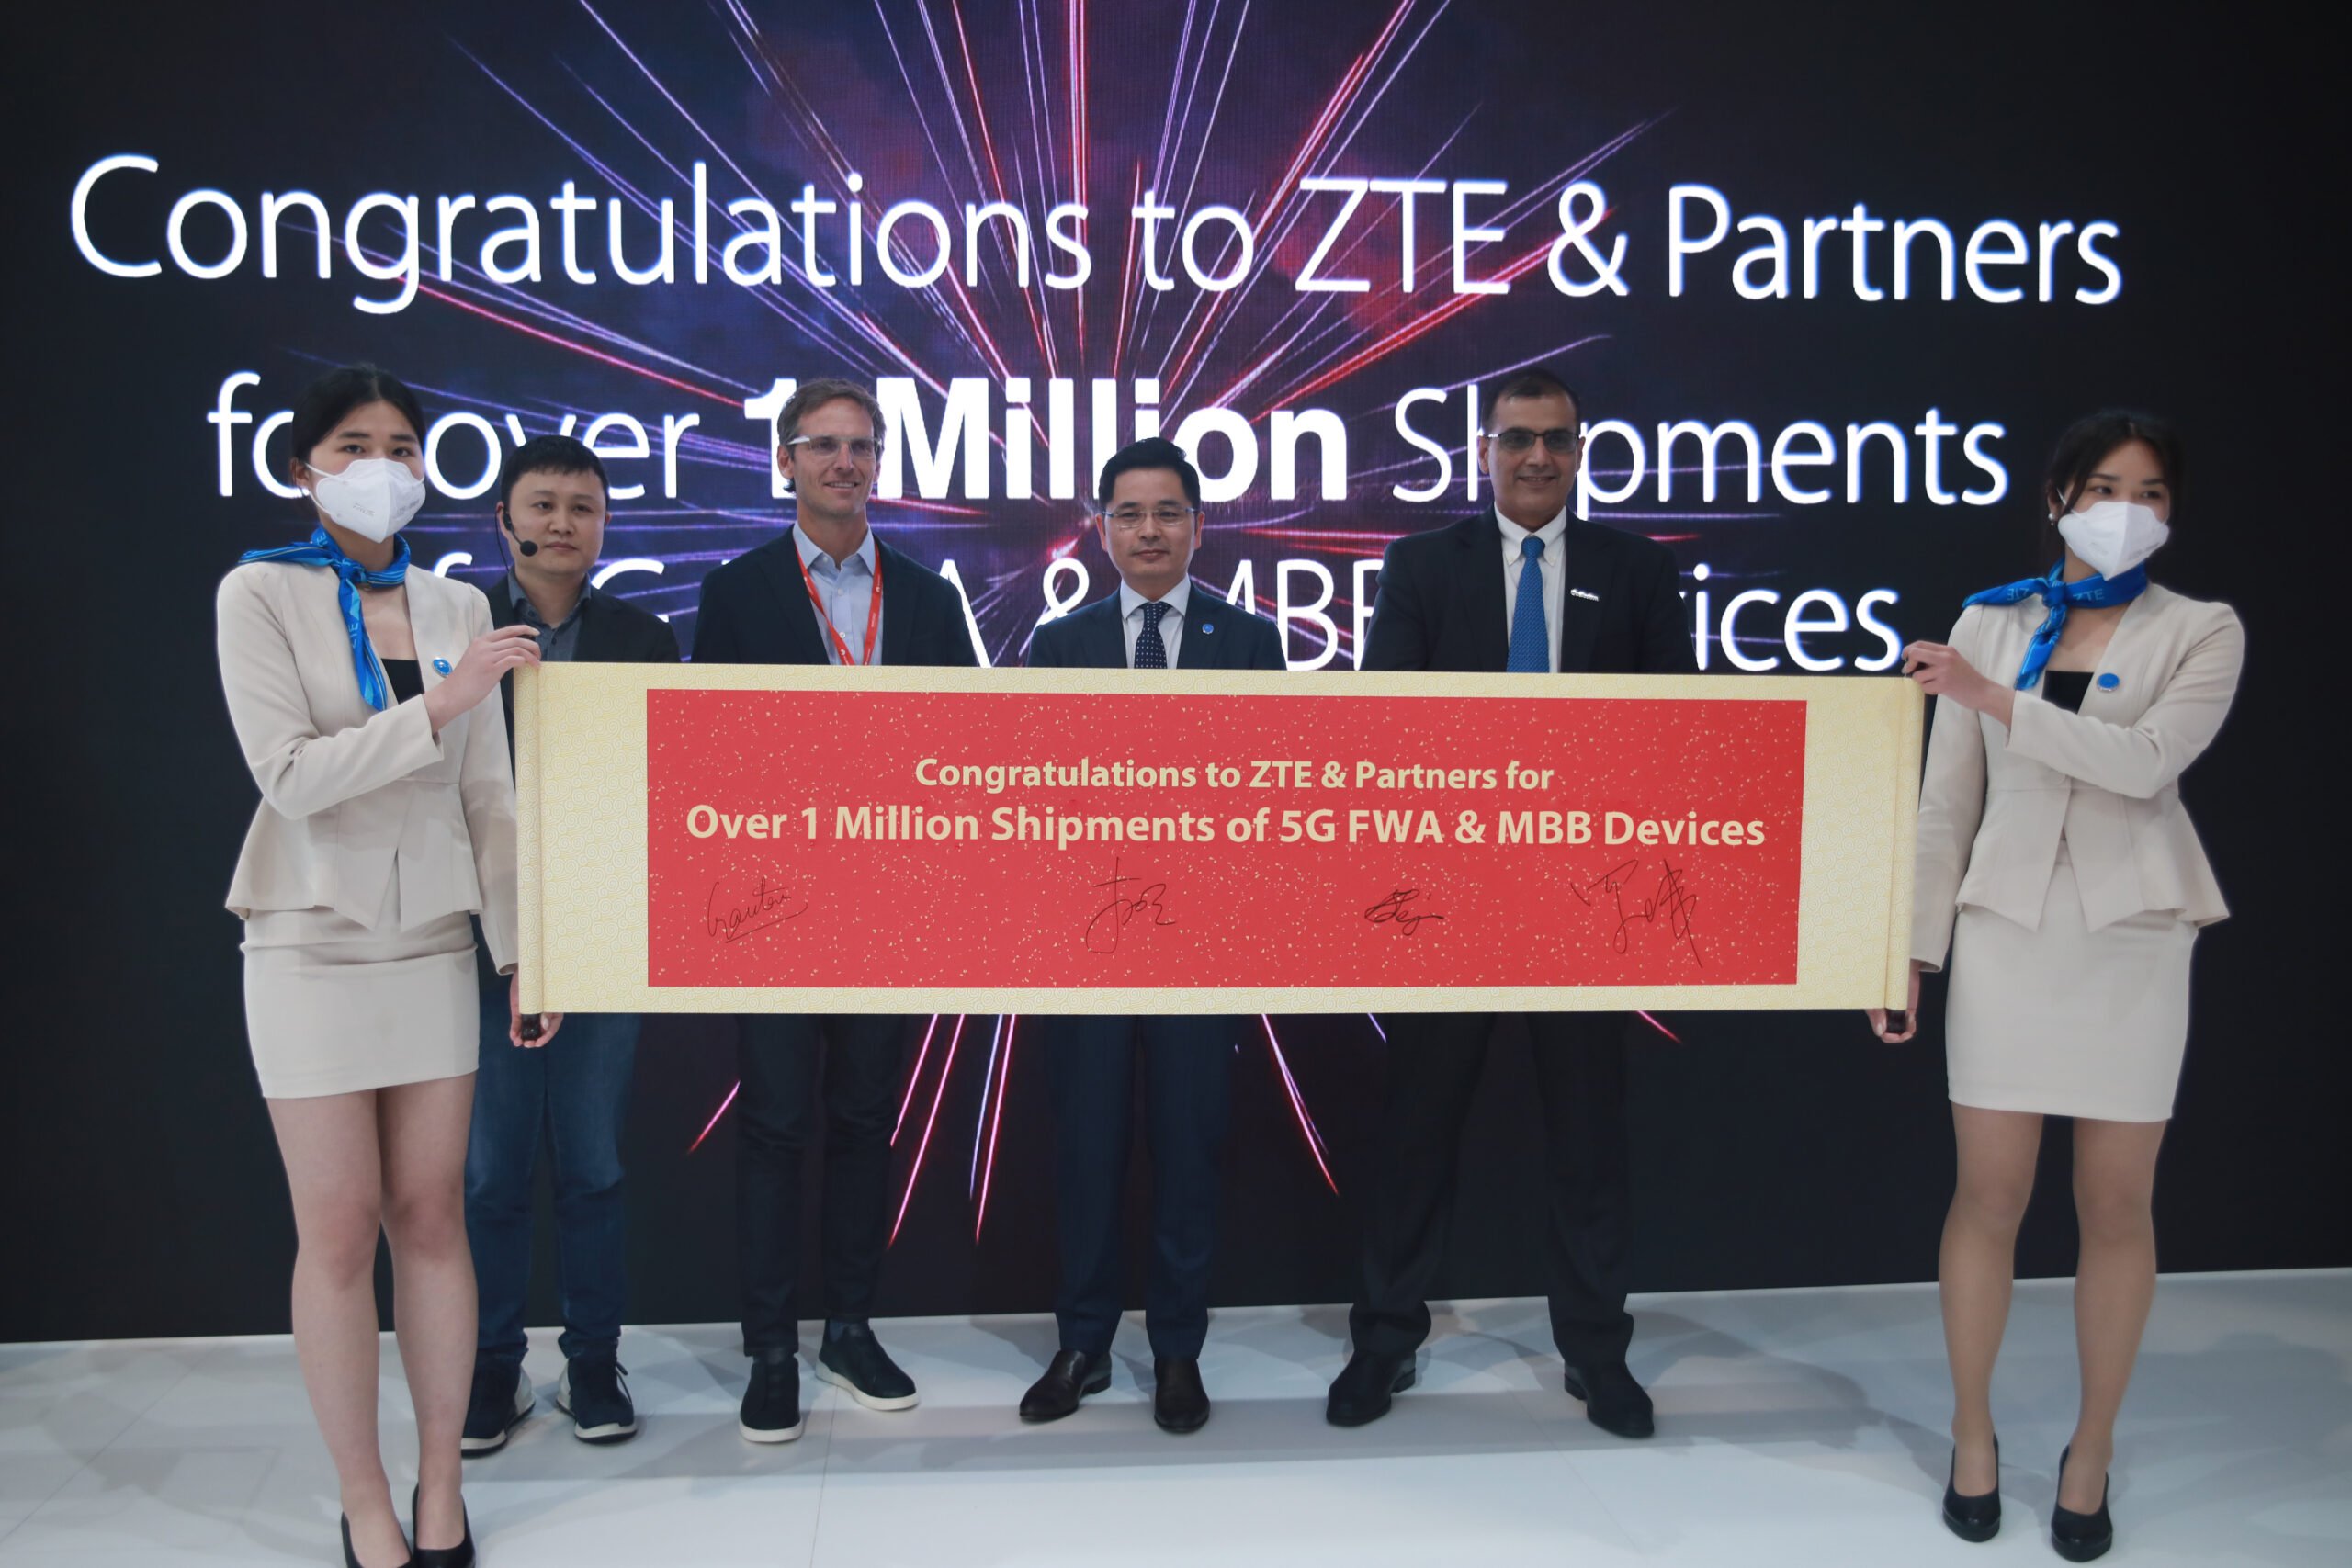 March 2.22 – ZTE 5G FWA MBB Devices had reached million-level shipments